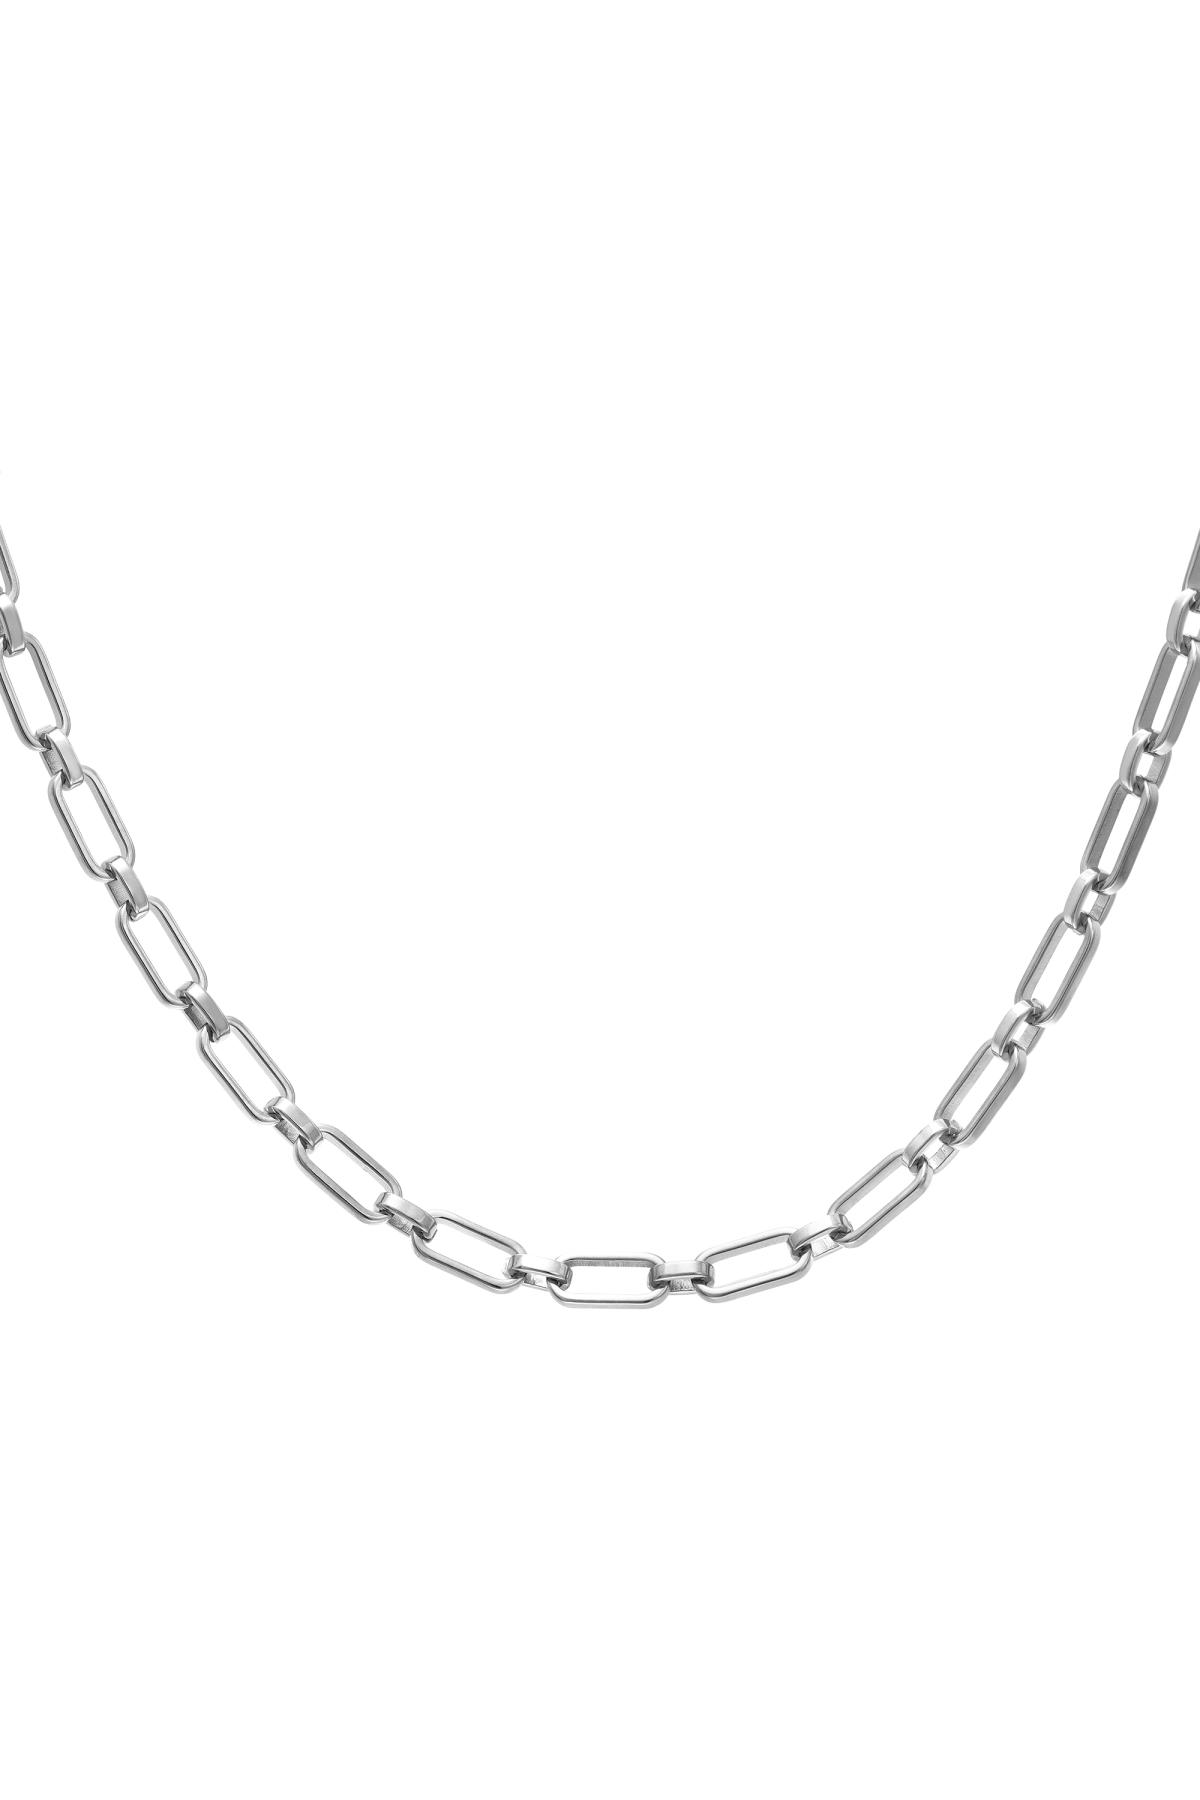 Statement necklace stainless steel Silver h5 